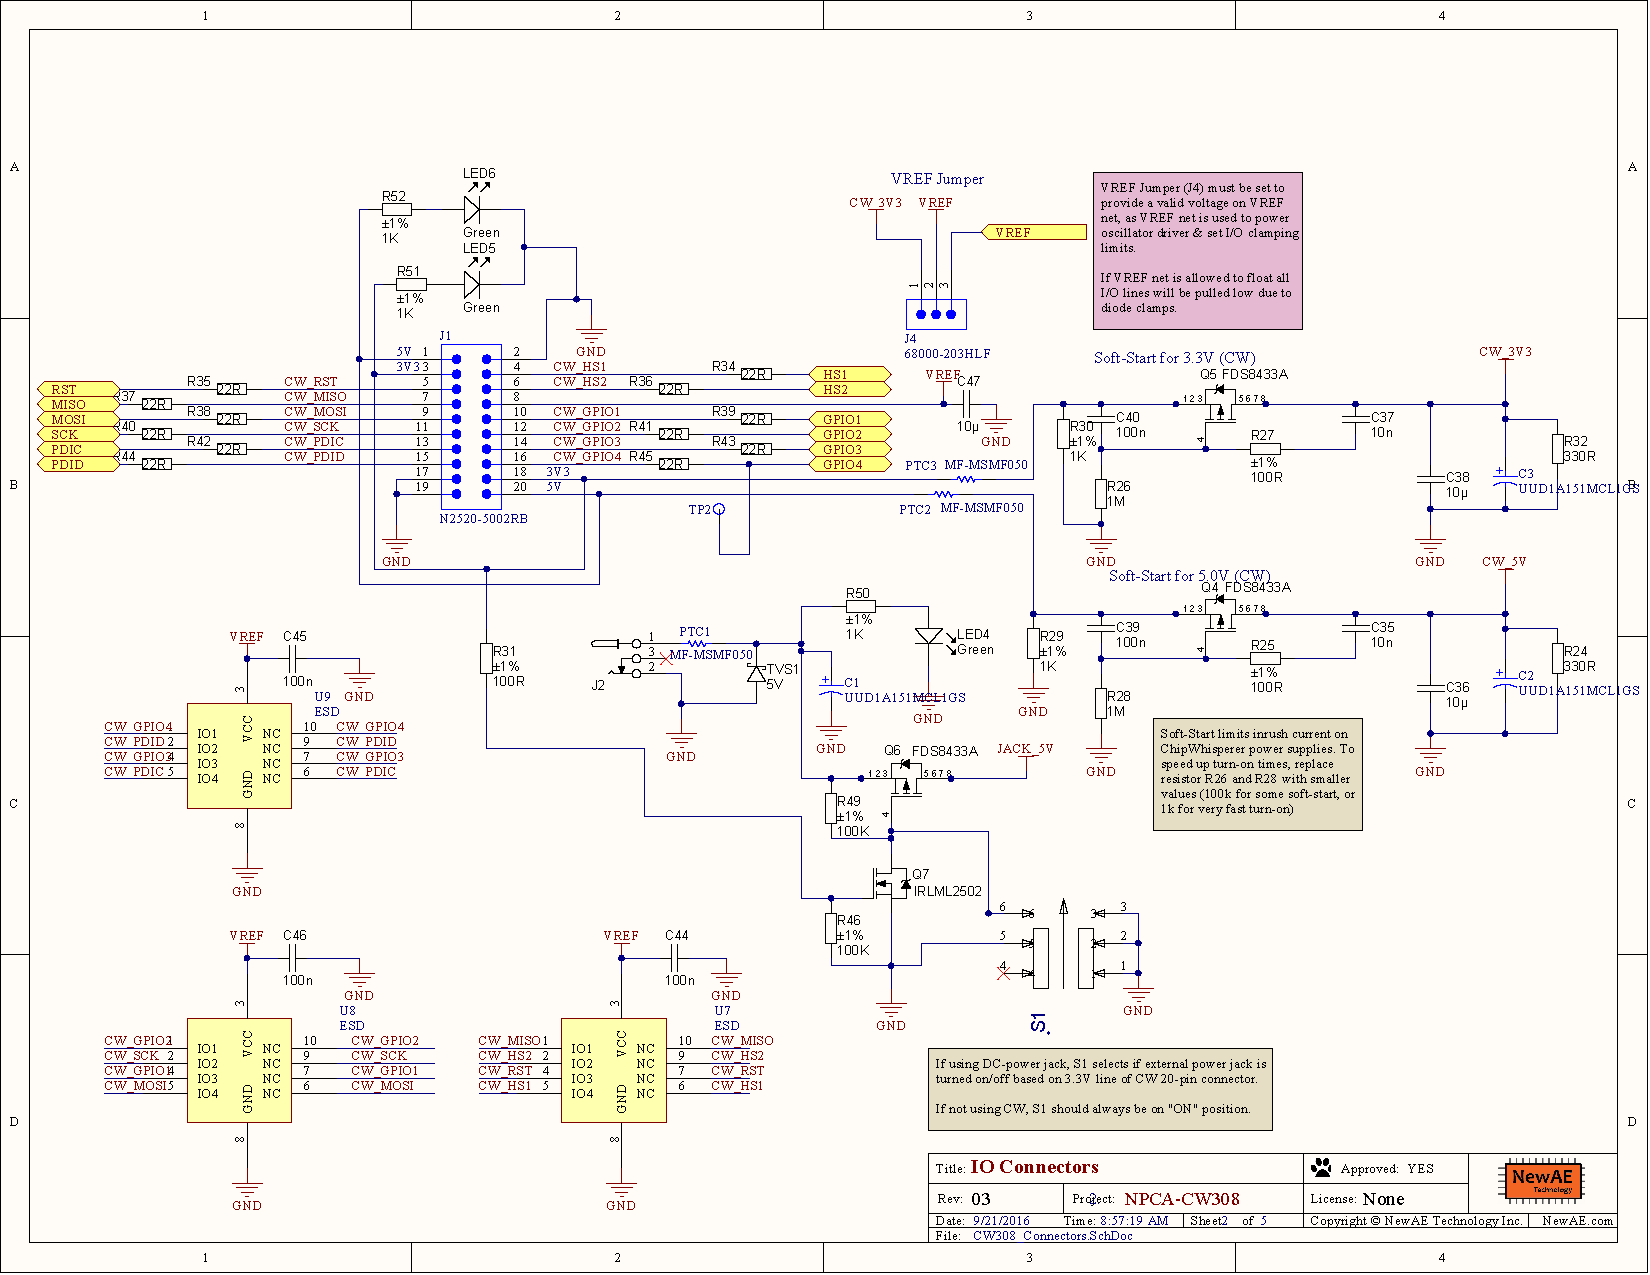 NAE-CW308-03_Schematic_Page_2.png